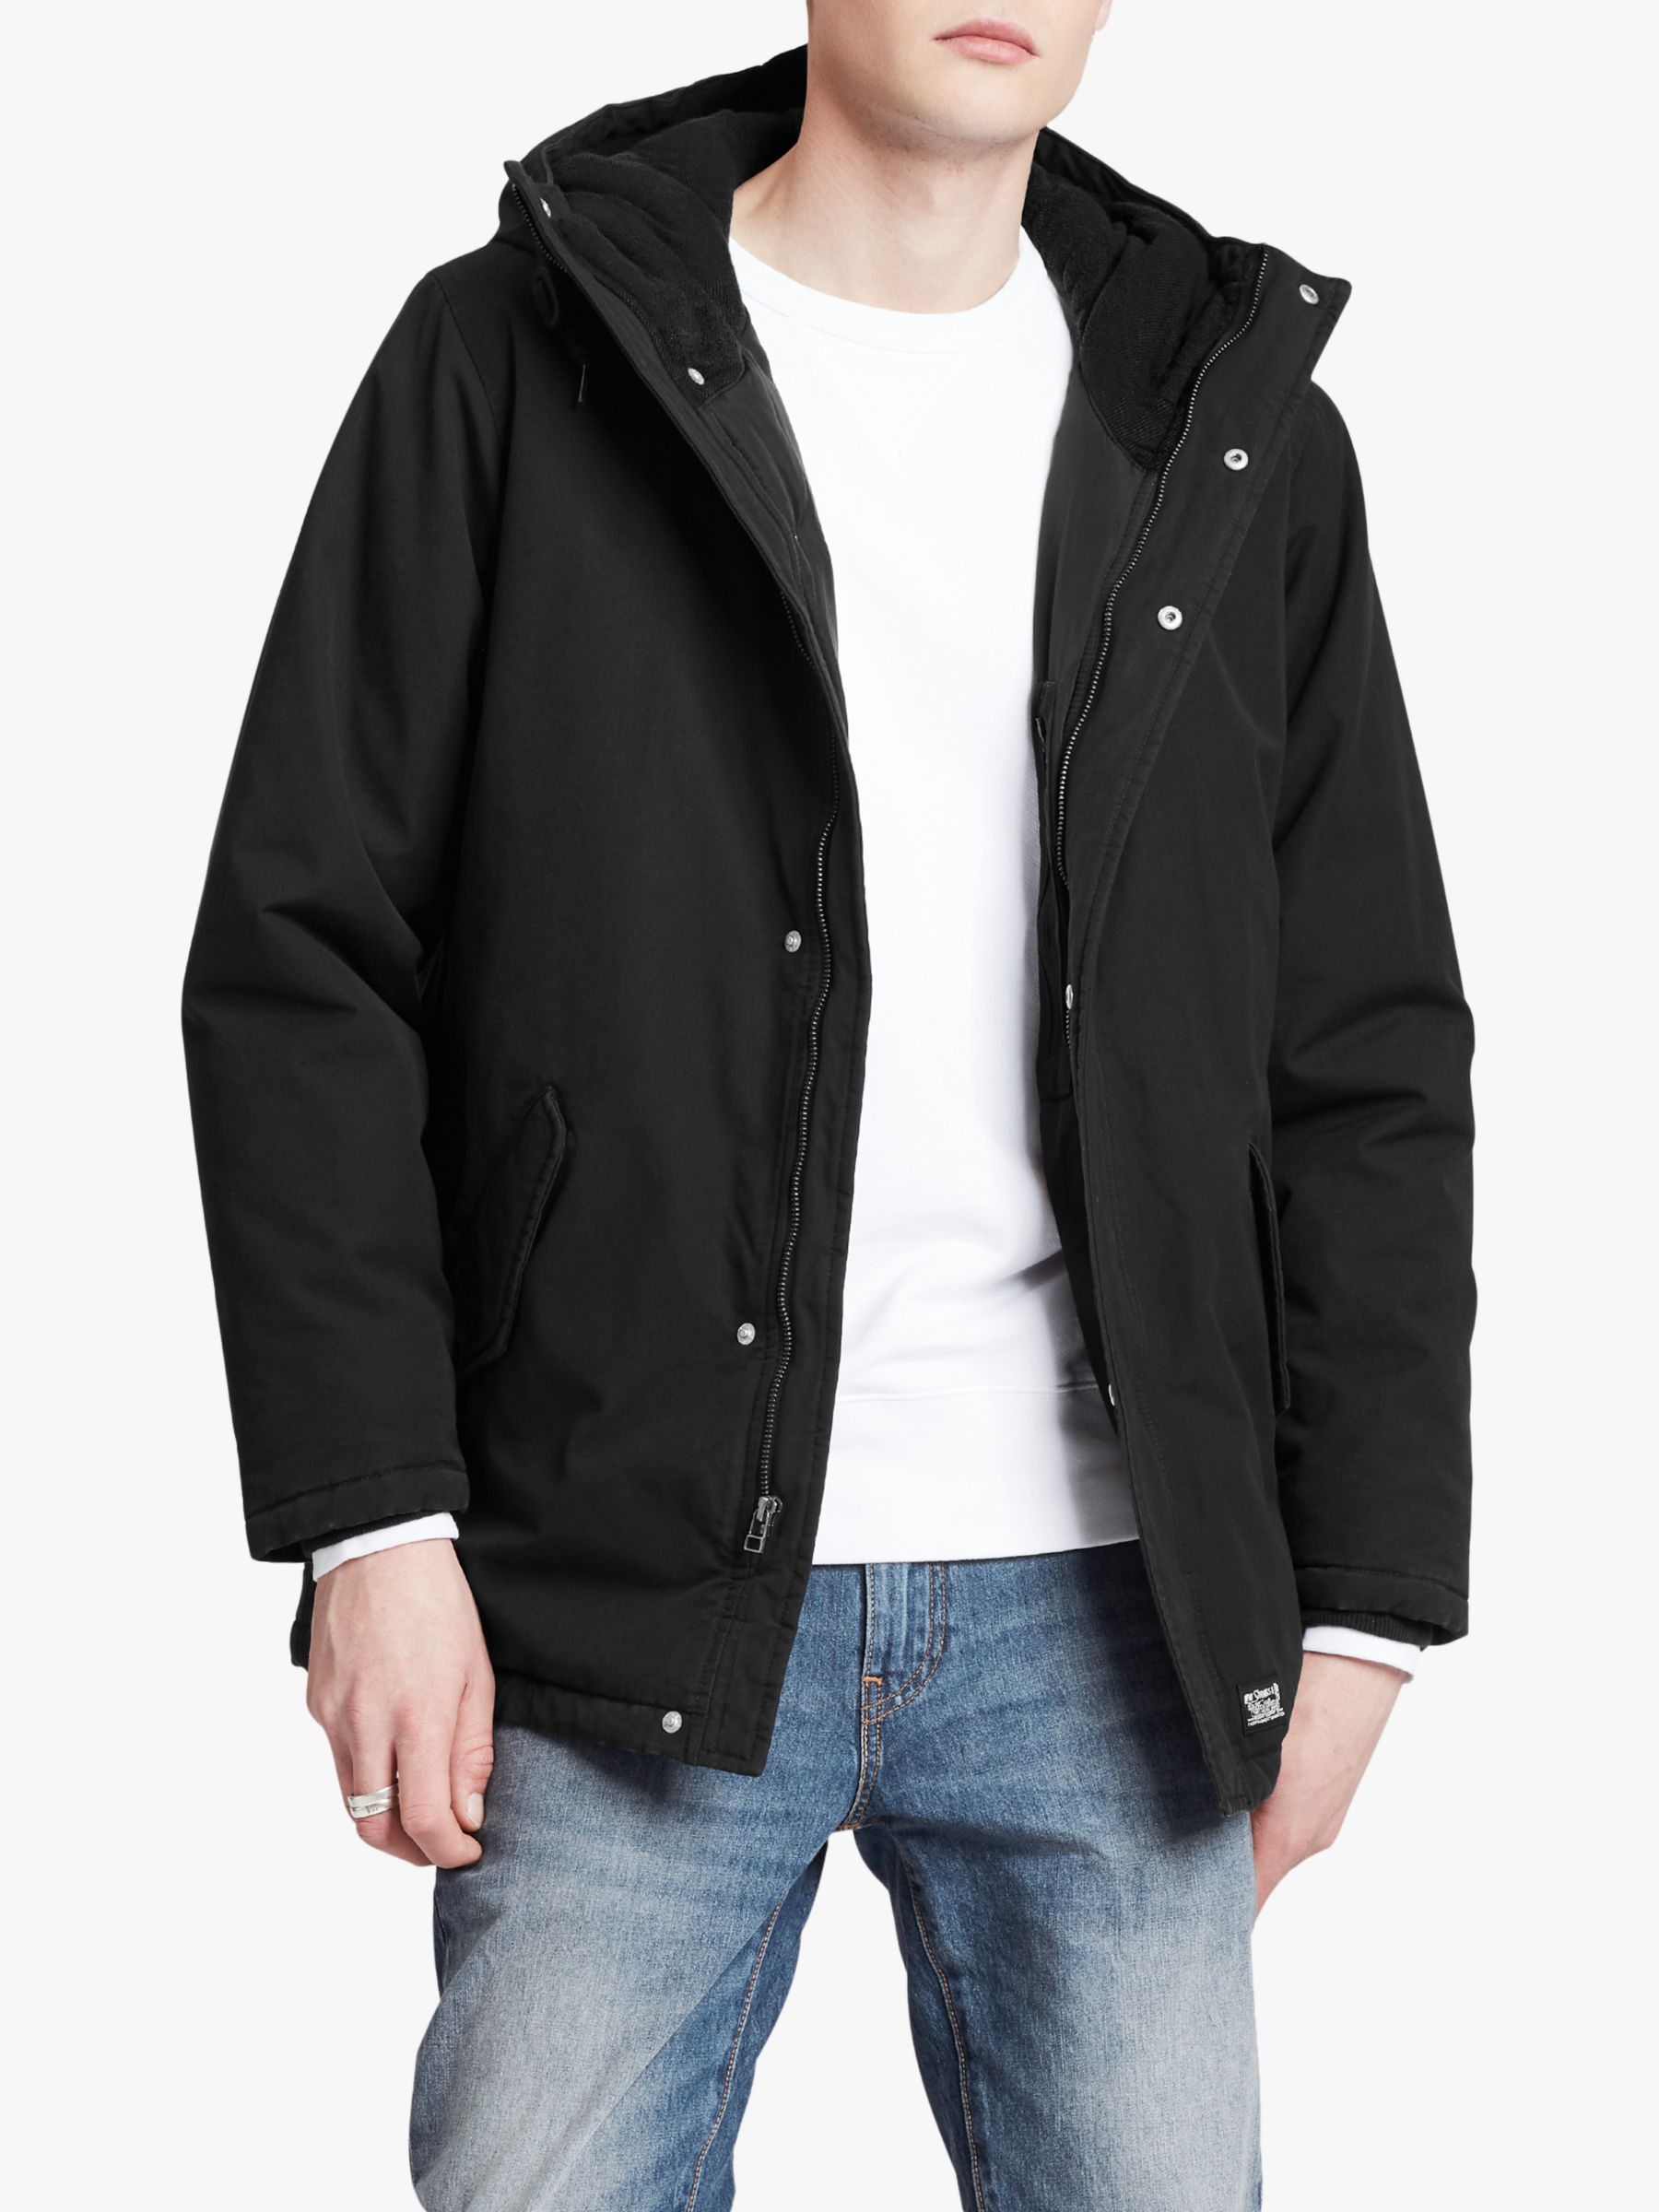 thermore padded parka coat levis